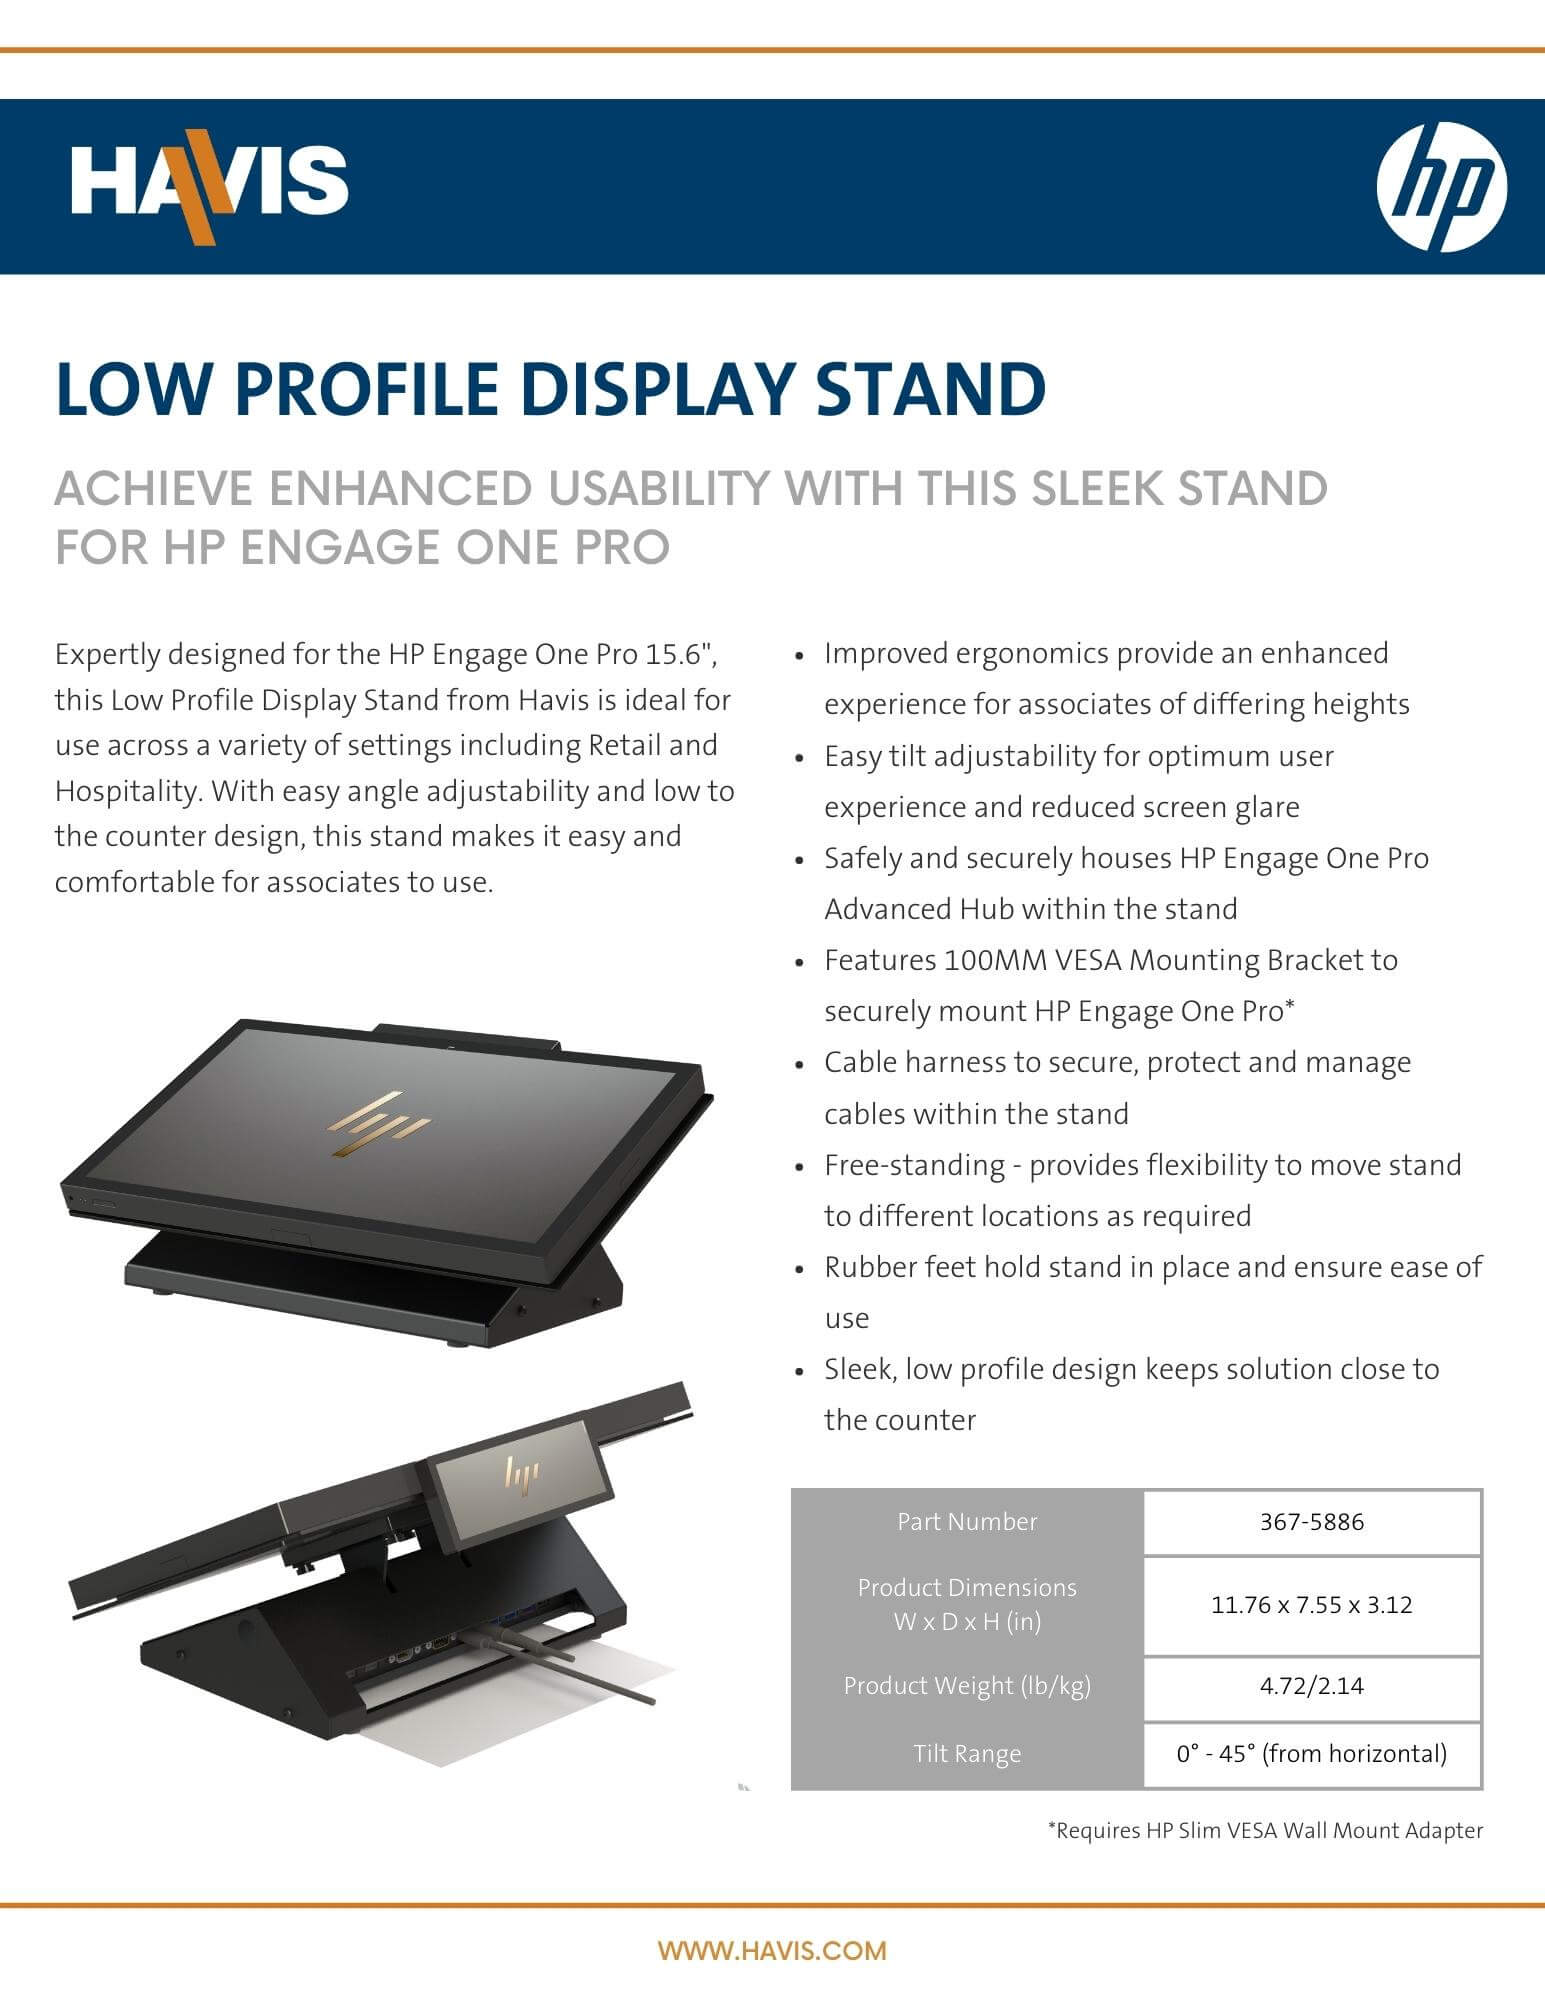 Low Profile Display Stand for HP Engage One Pro - Datasheet